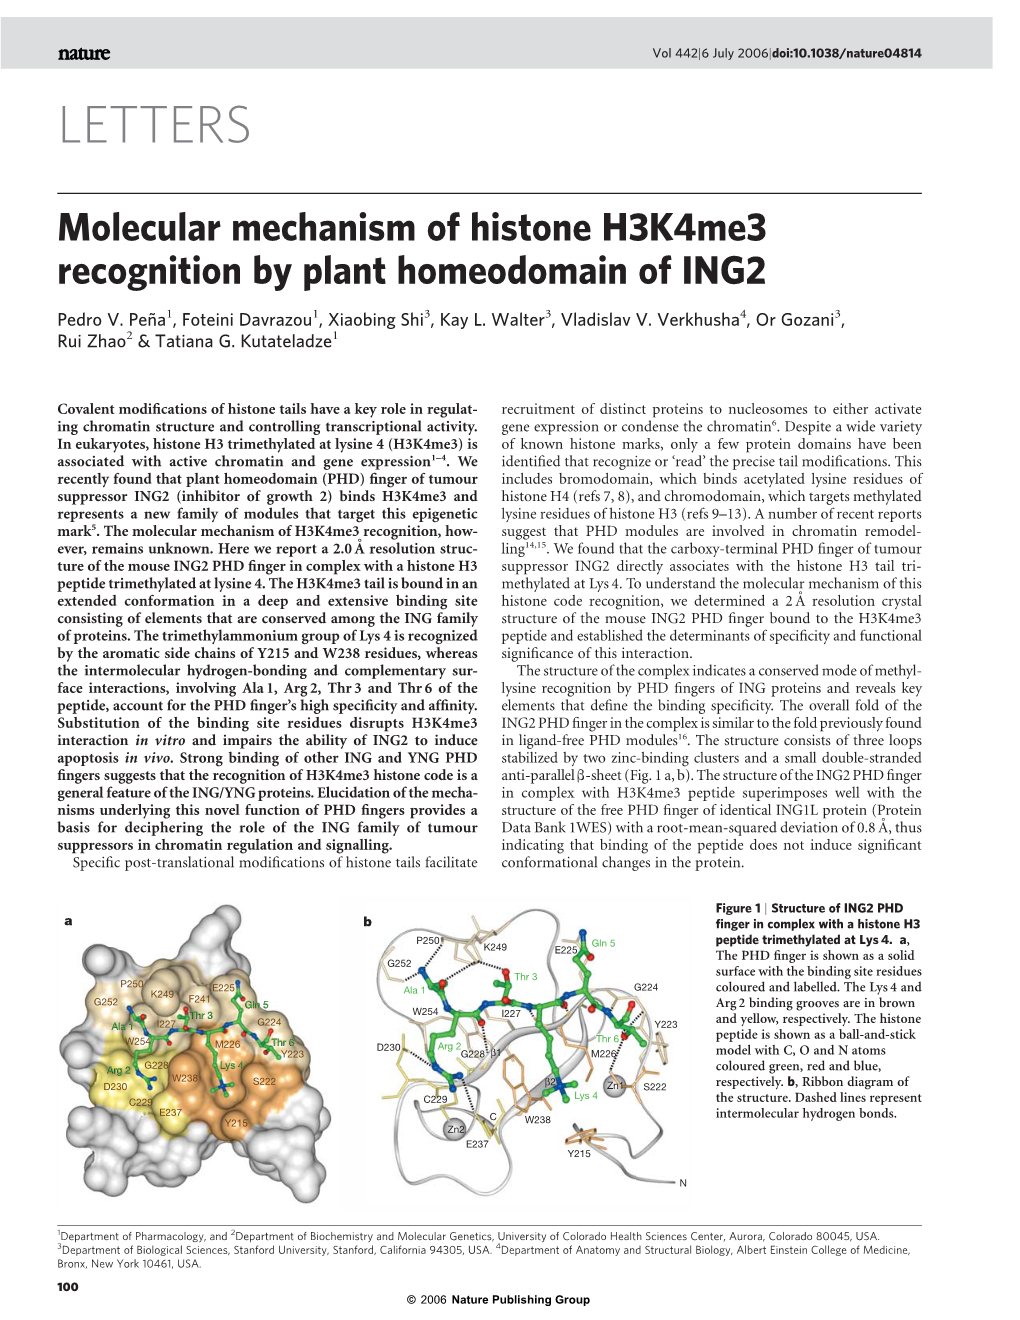 Molecular Mechanism of Histone H3k4me3 Recognition by Plant Homeodomain of ING2